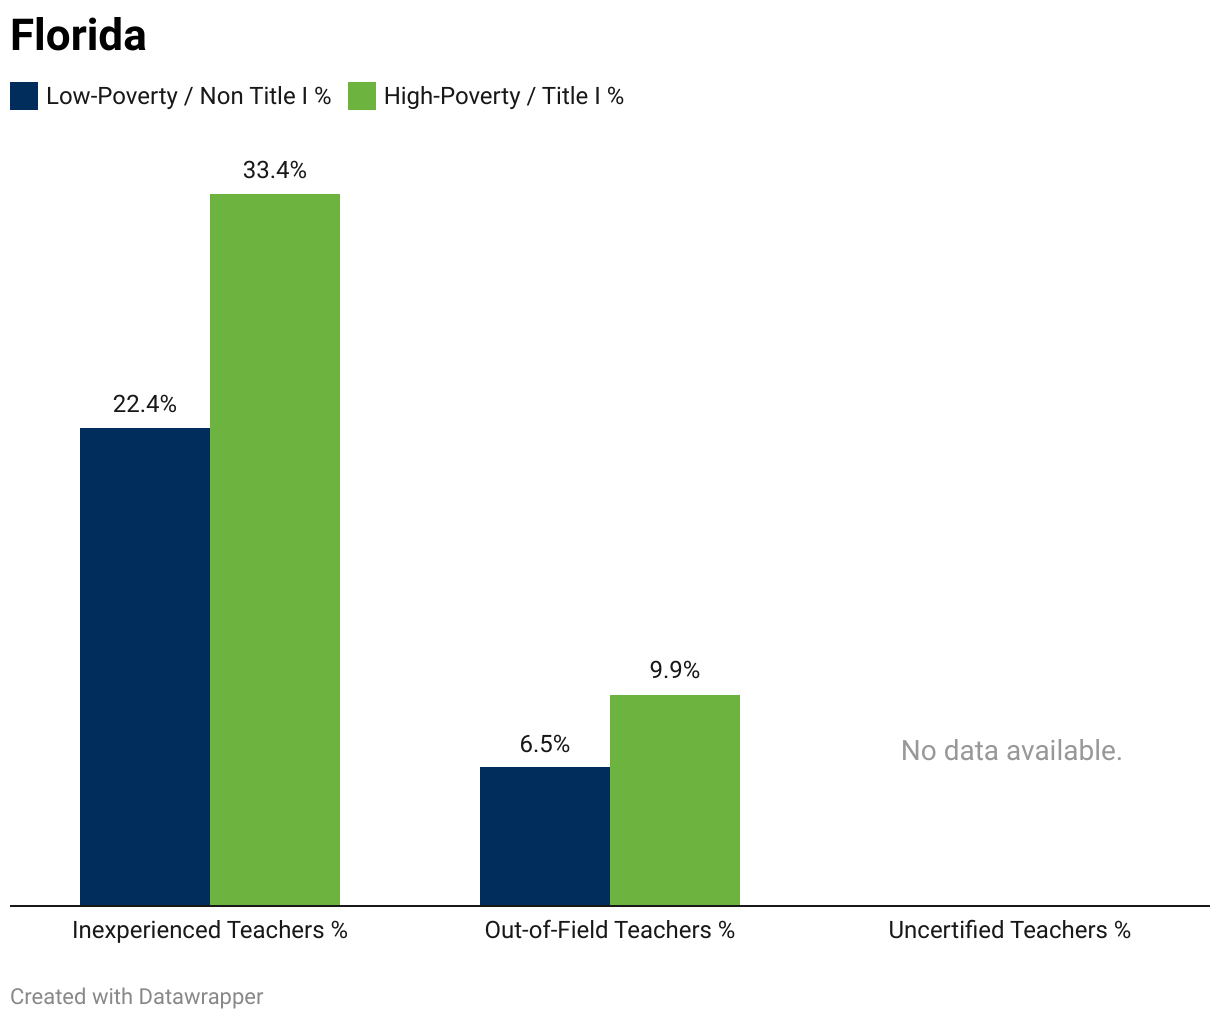 A grouped column chart showing the percentage of inexperienced, out-of-field and uncertified teachers in low-poverty non-Title I schools vs. higher-poverty Title I schools IN FLORIDA.